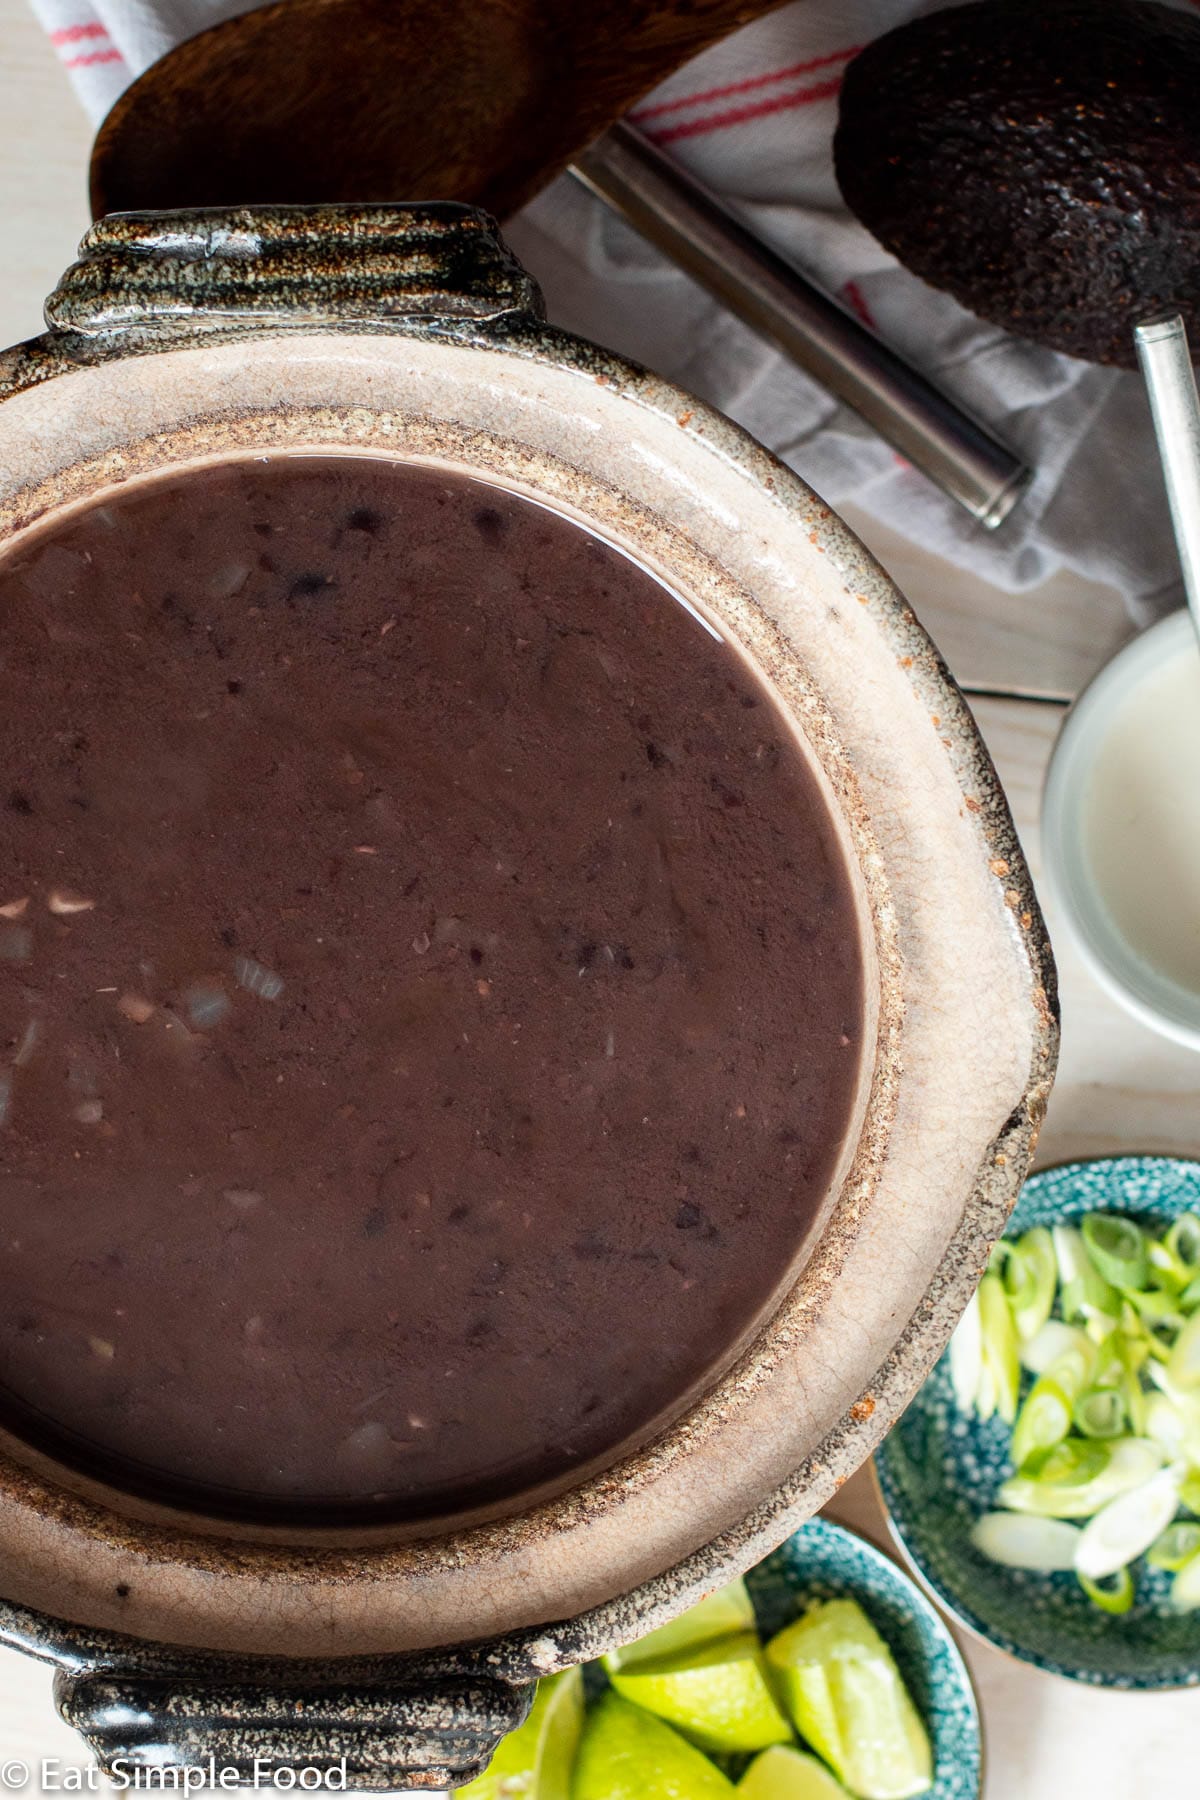 Top down view of bowl of dark black bean soup with lime wedges, sliced green onions, sour cream, and avocado in the background.